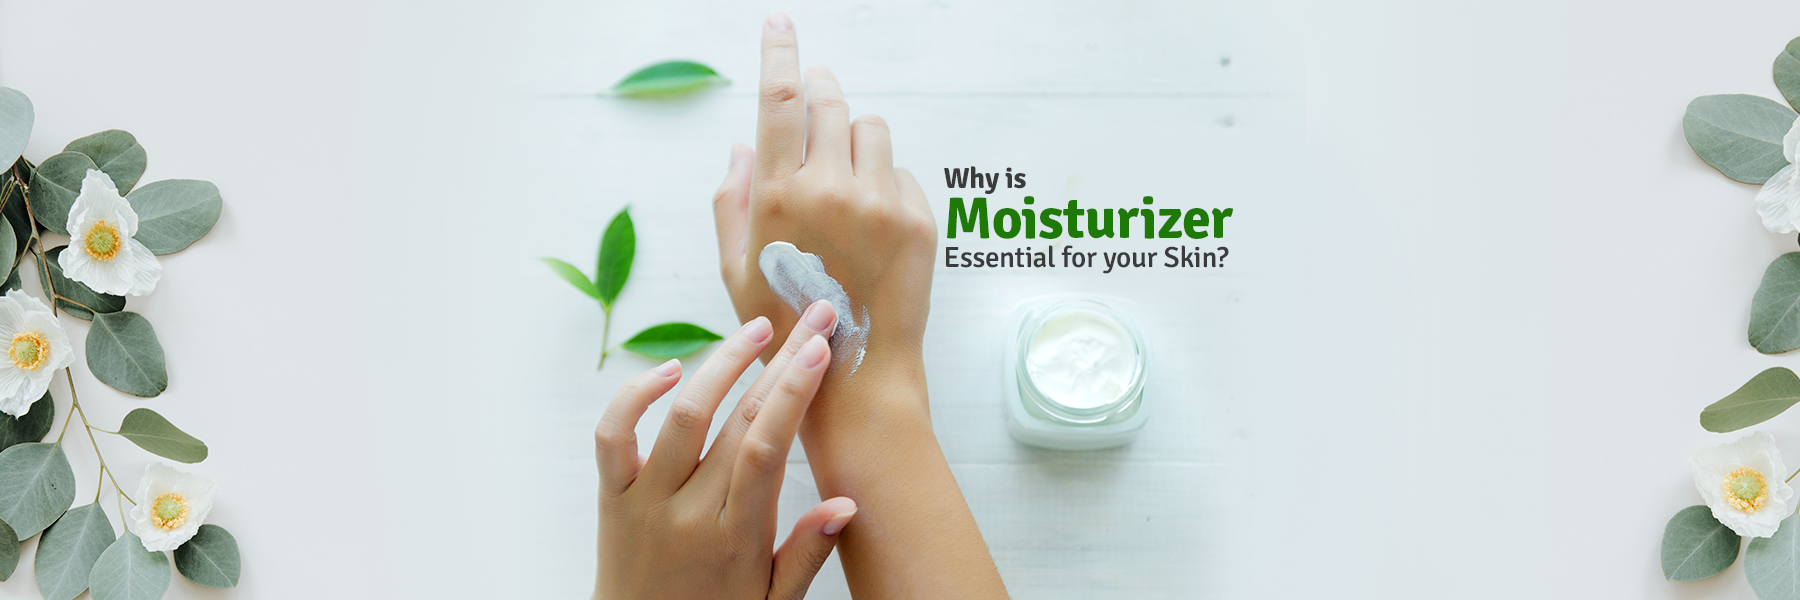 Why is Moisturizer essential for your skin? FromIndia.com